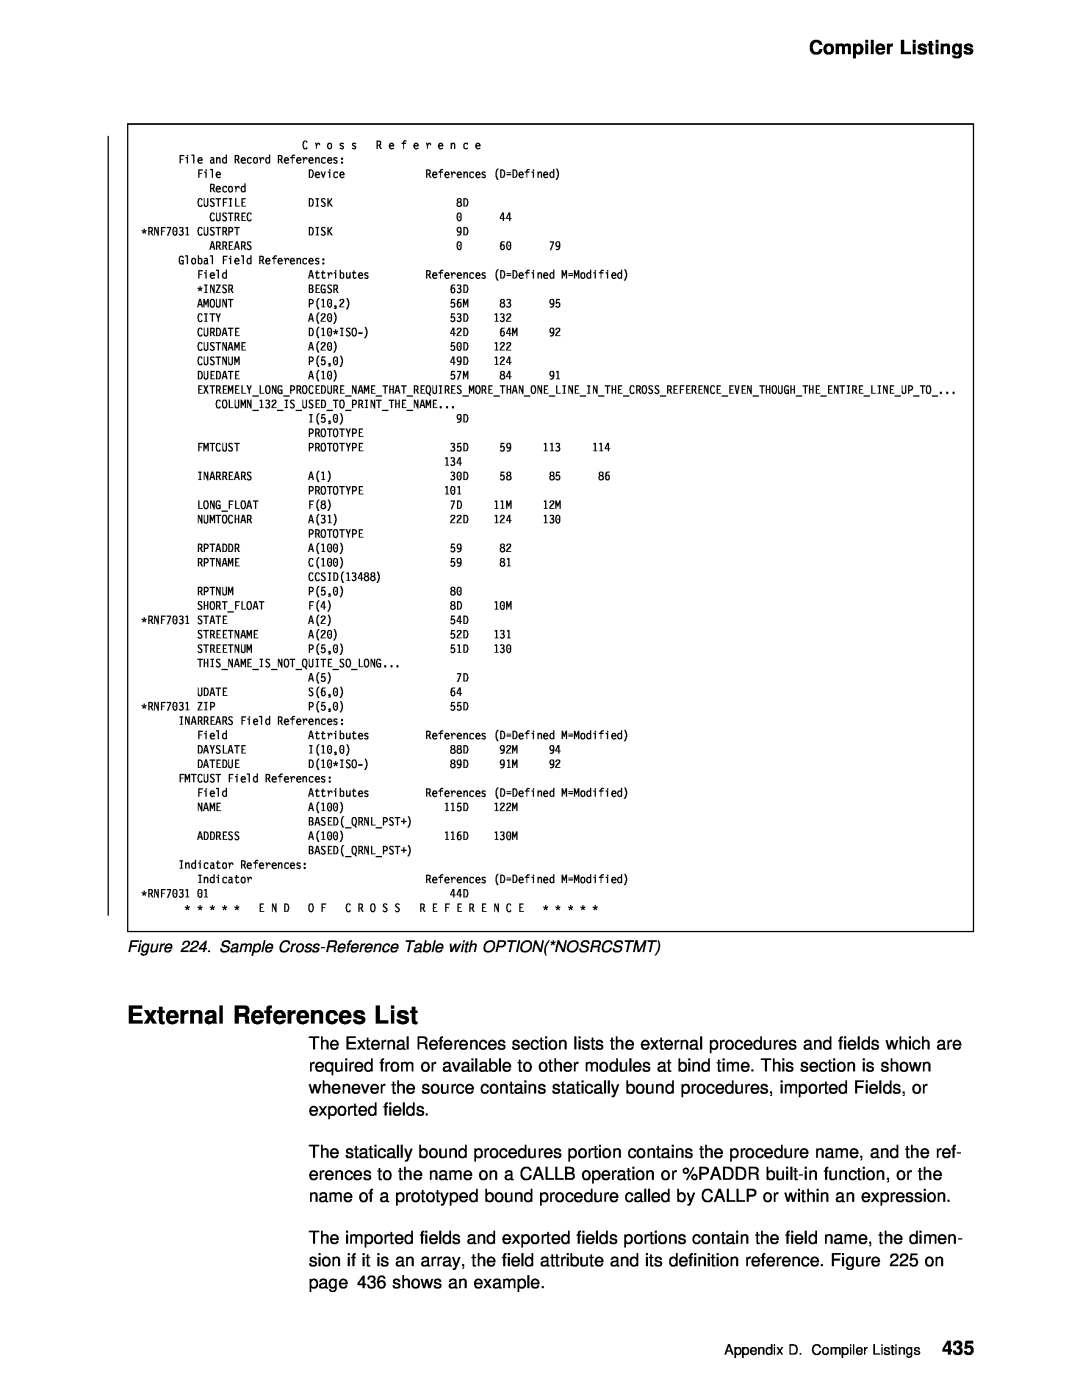 IBM AS/400 manual External References List, Compiler Listings, Sample Cross-Reference Table with OPTION*NOSRCSTMT 